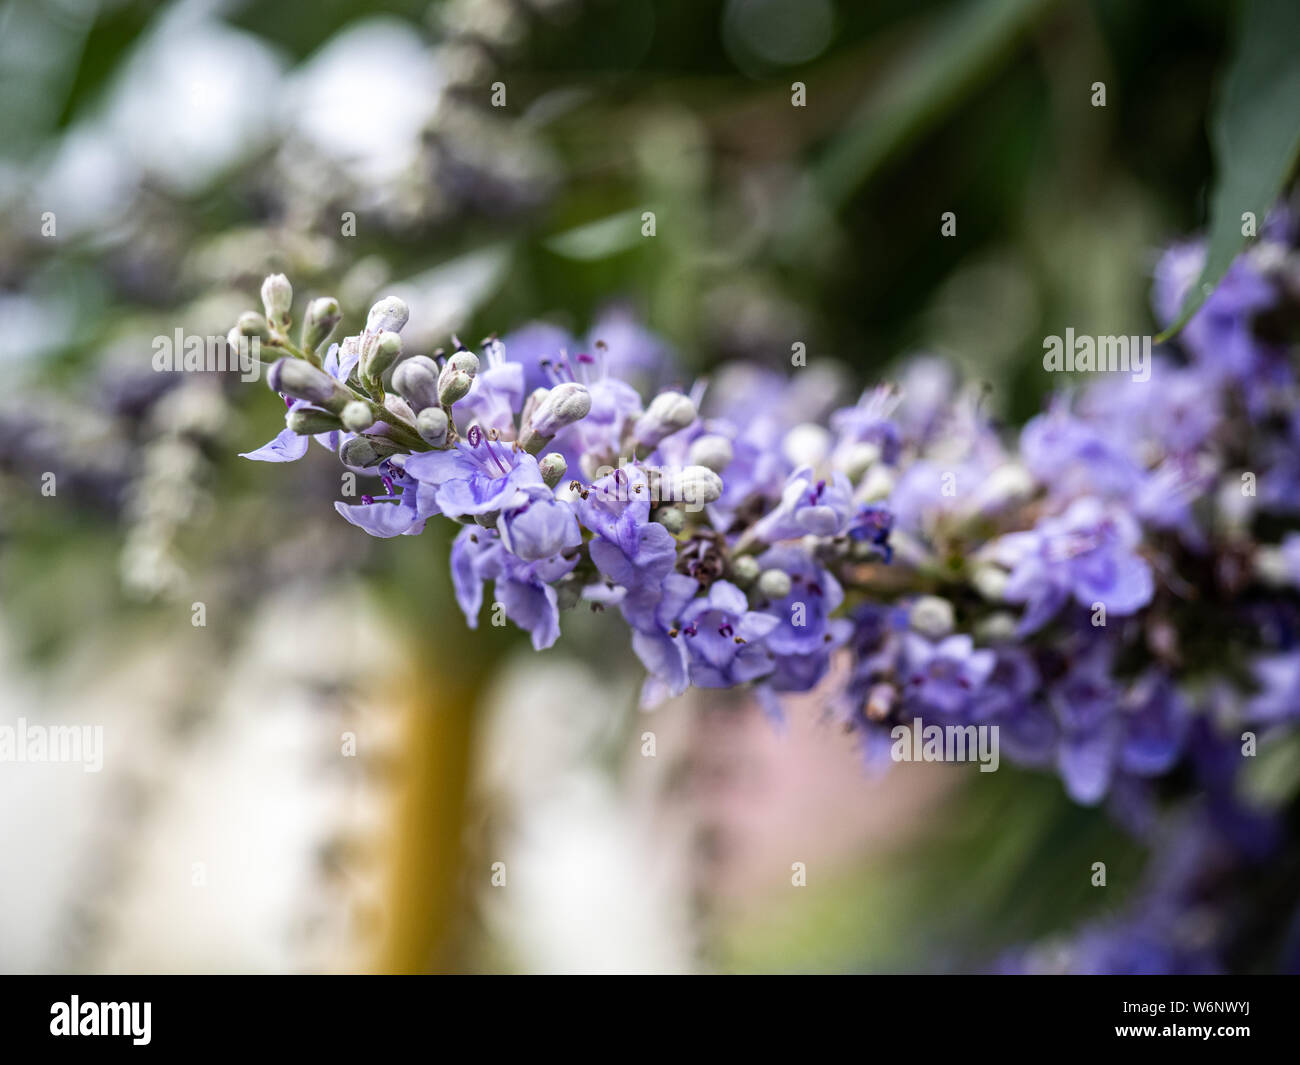 A string of lilac chaste tree flowers, vitex angus-castus, bloom beside a walking path in central Japan. Stock Photo